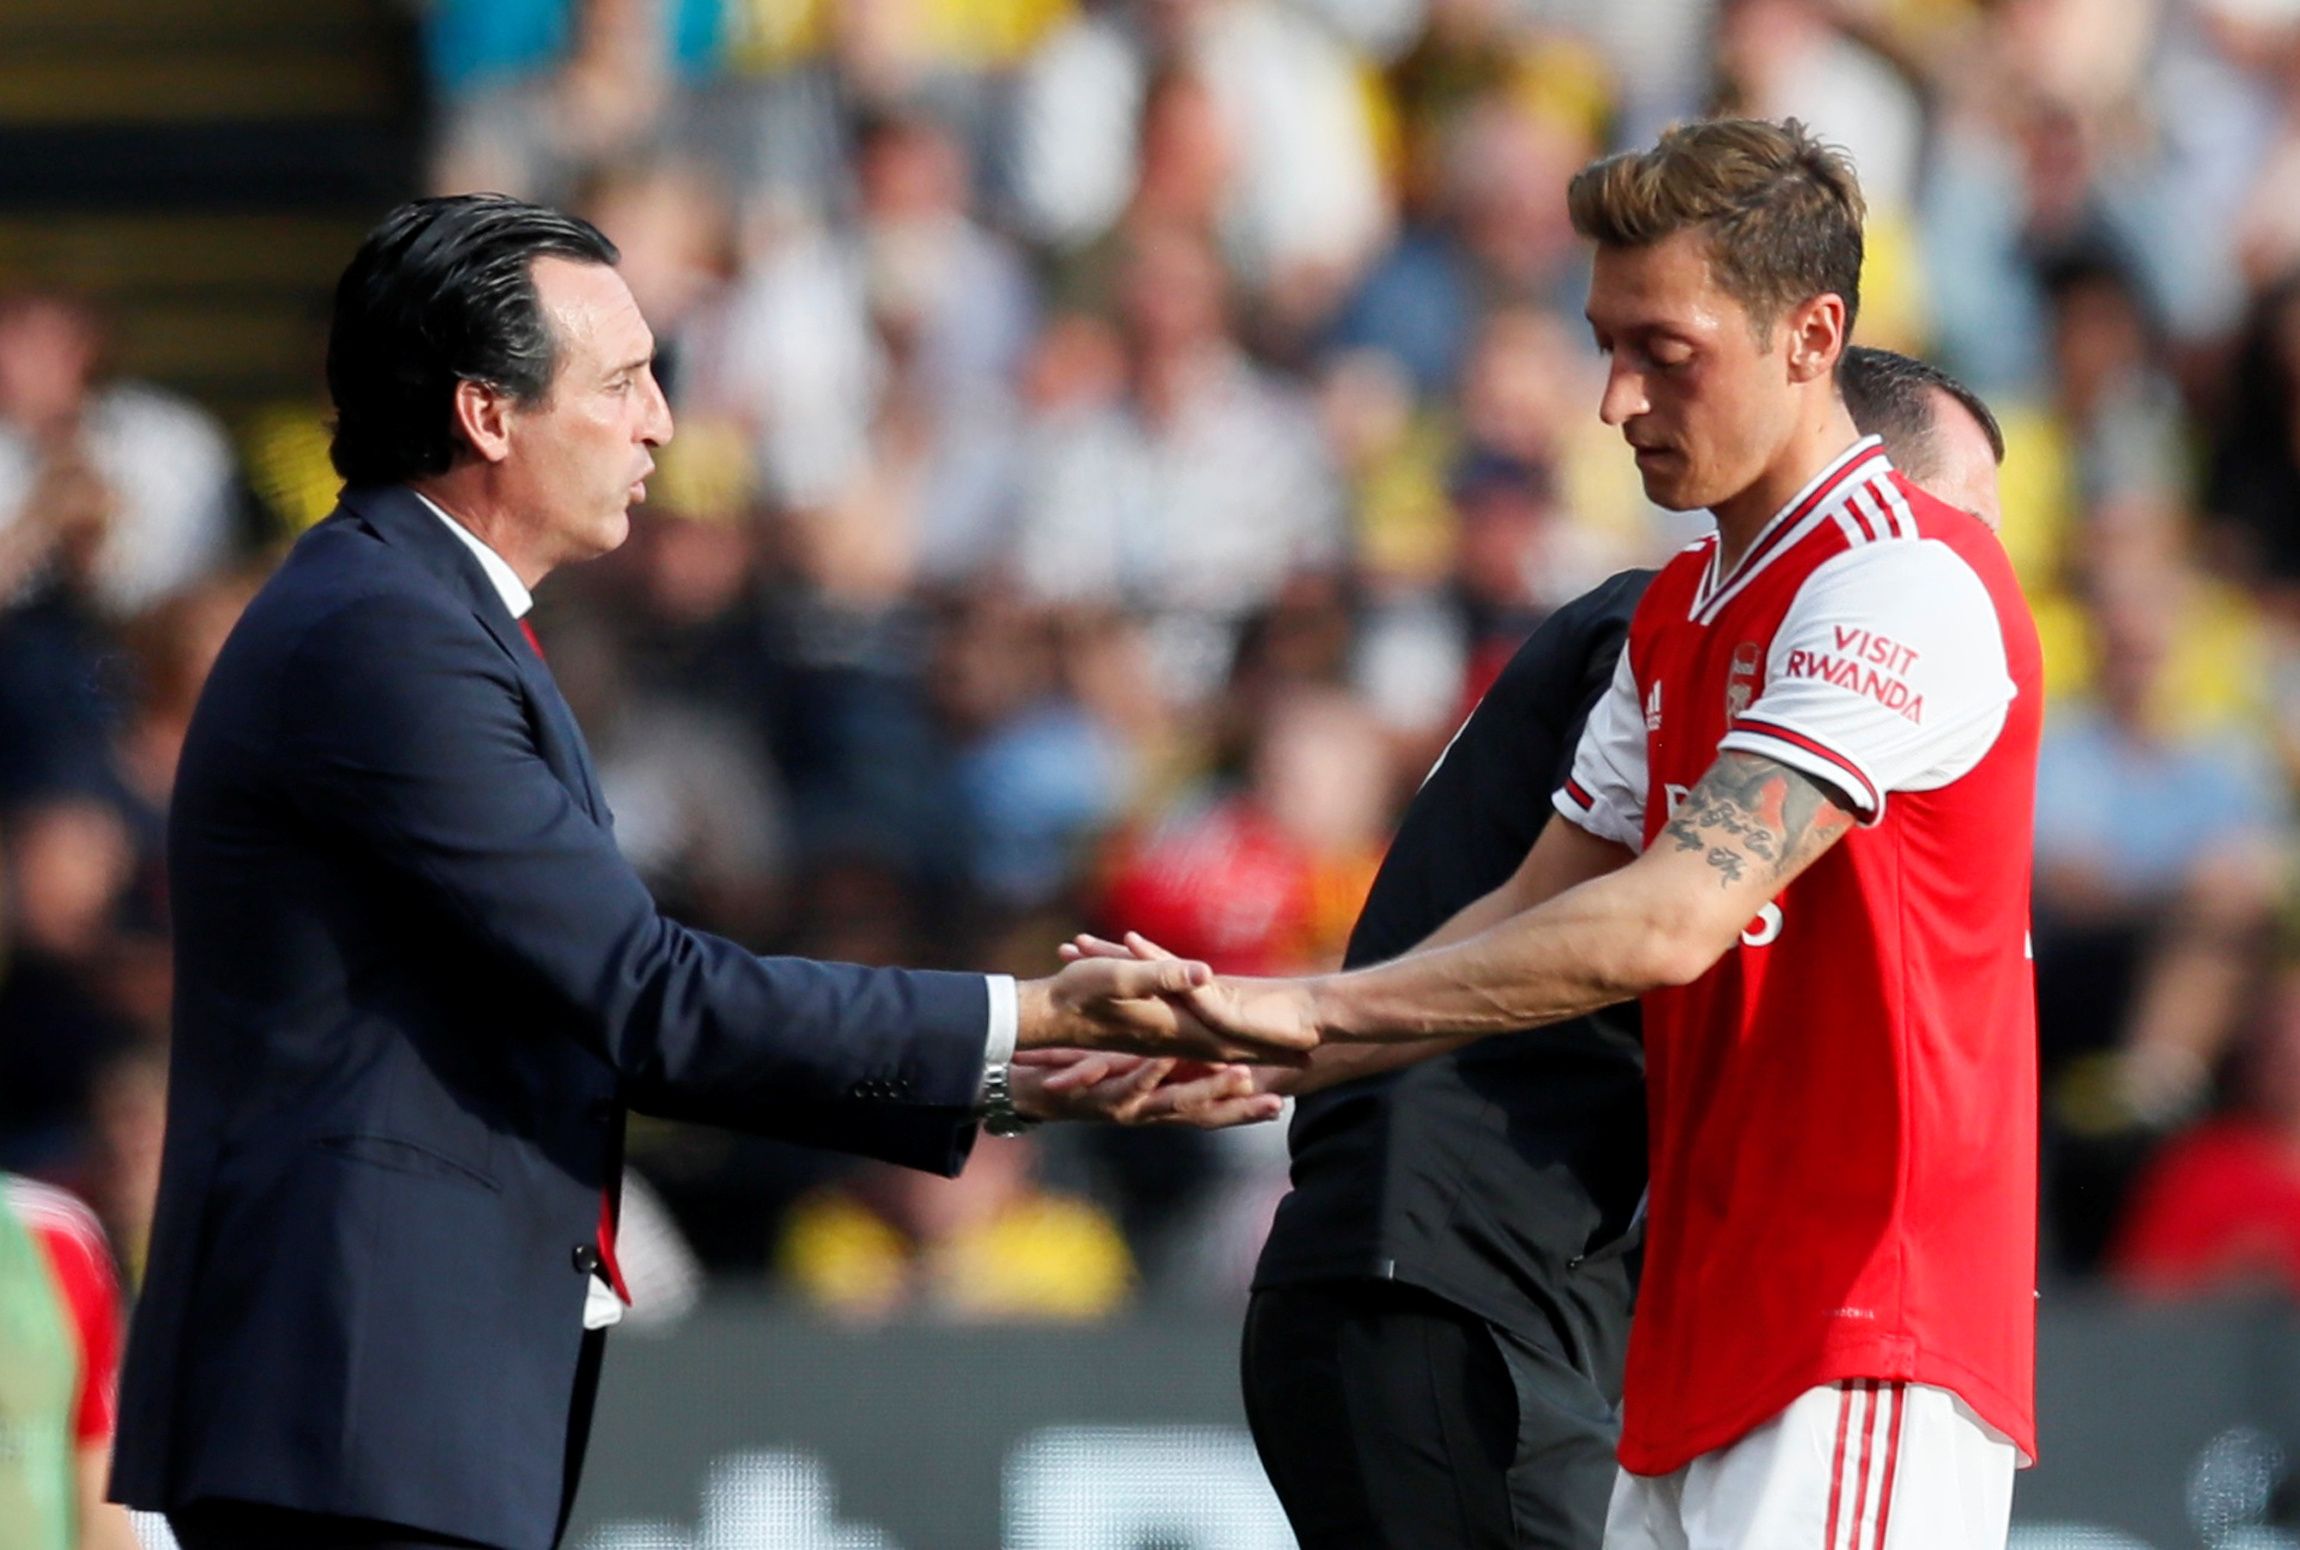 Soccer Football - Premier League - Watford v Arsenal - Vicarage Road, Watford, Britain - September 15, 2019  Arsenal's Mesut Ozil shakes hands with manager Unai Emery after being substituted off REUTERS/David Klein  EDITORIAL USE ONLY. No use with unauthorized audio, video, data, fixture lists, club/league logos or 